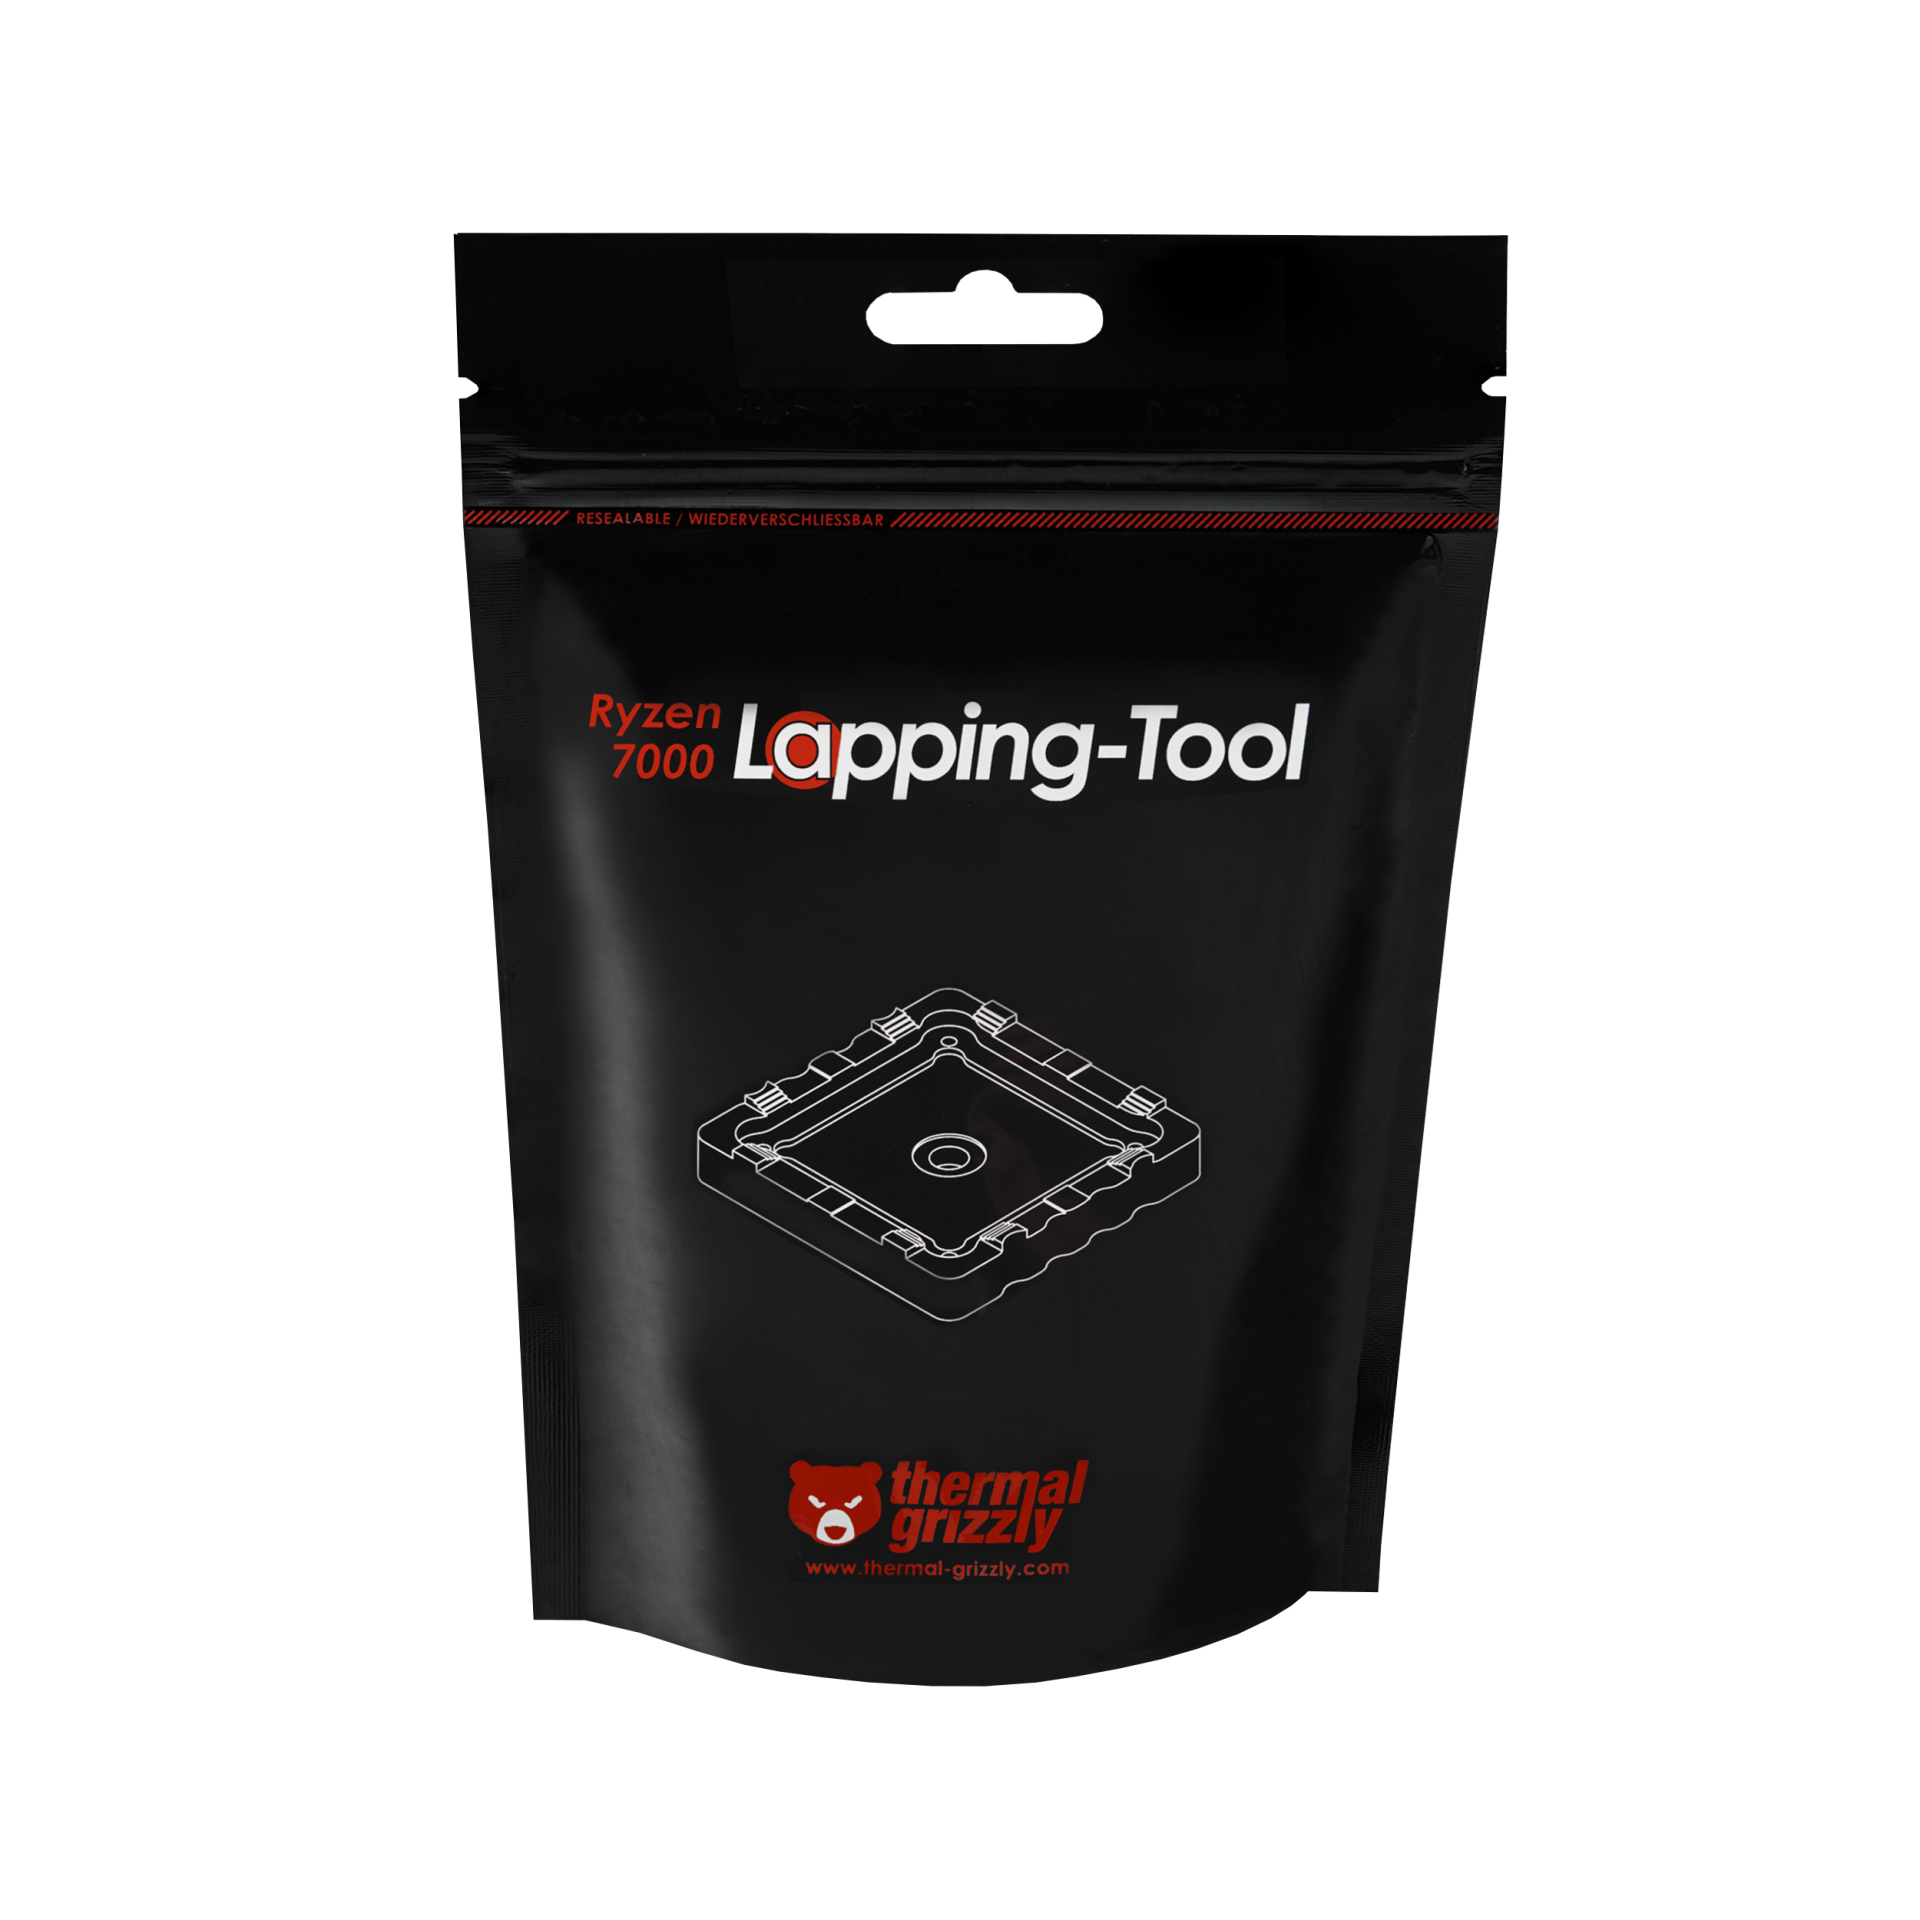 Thermal Grizzly - Herramienta de Lapping Thermal Grizzly para Ryzen 7000